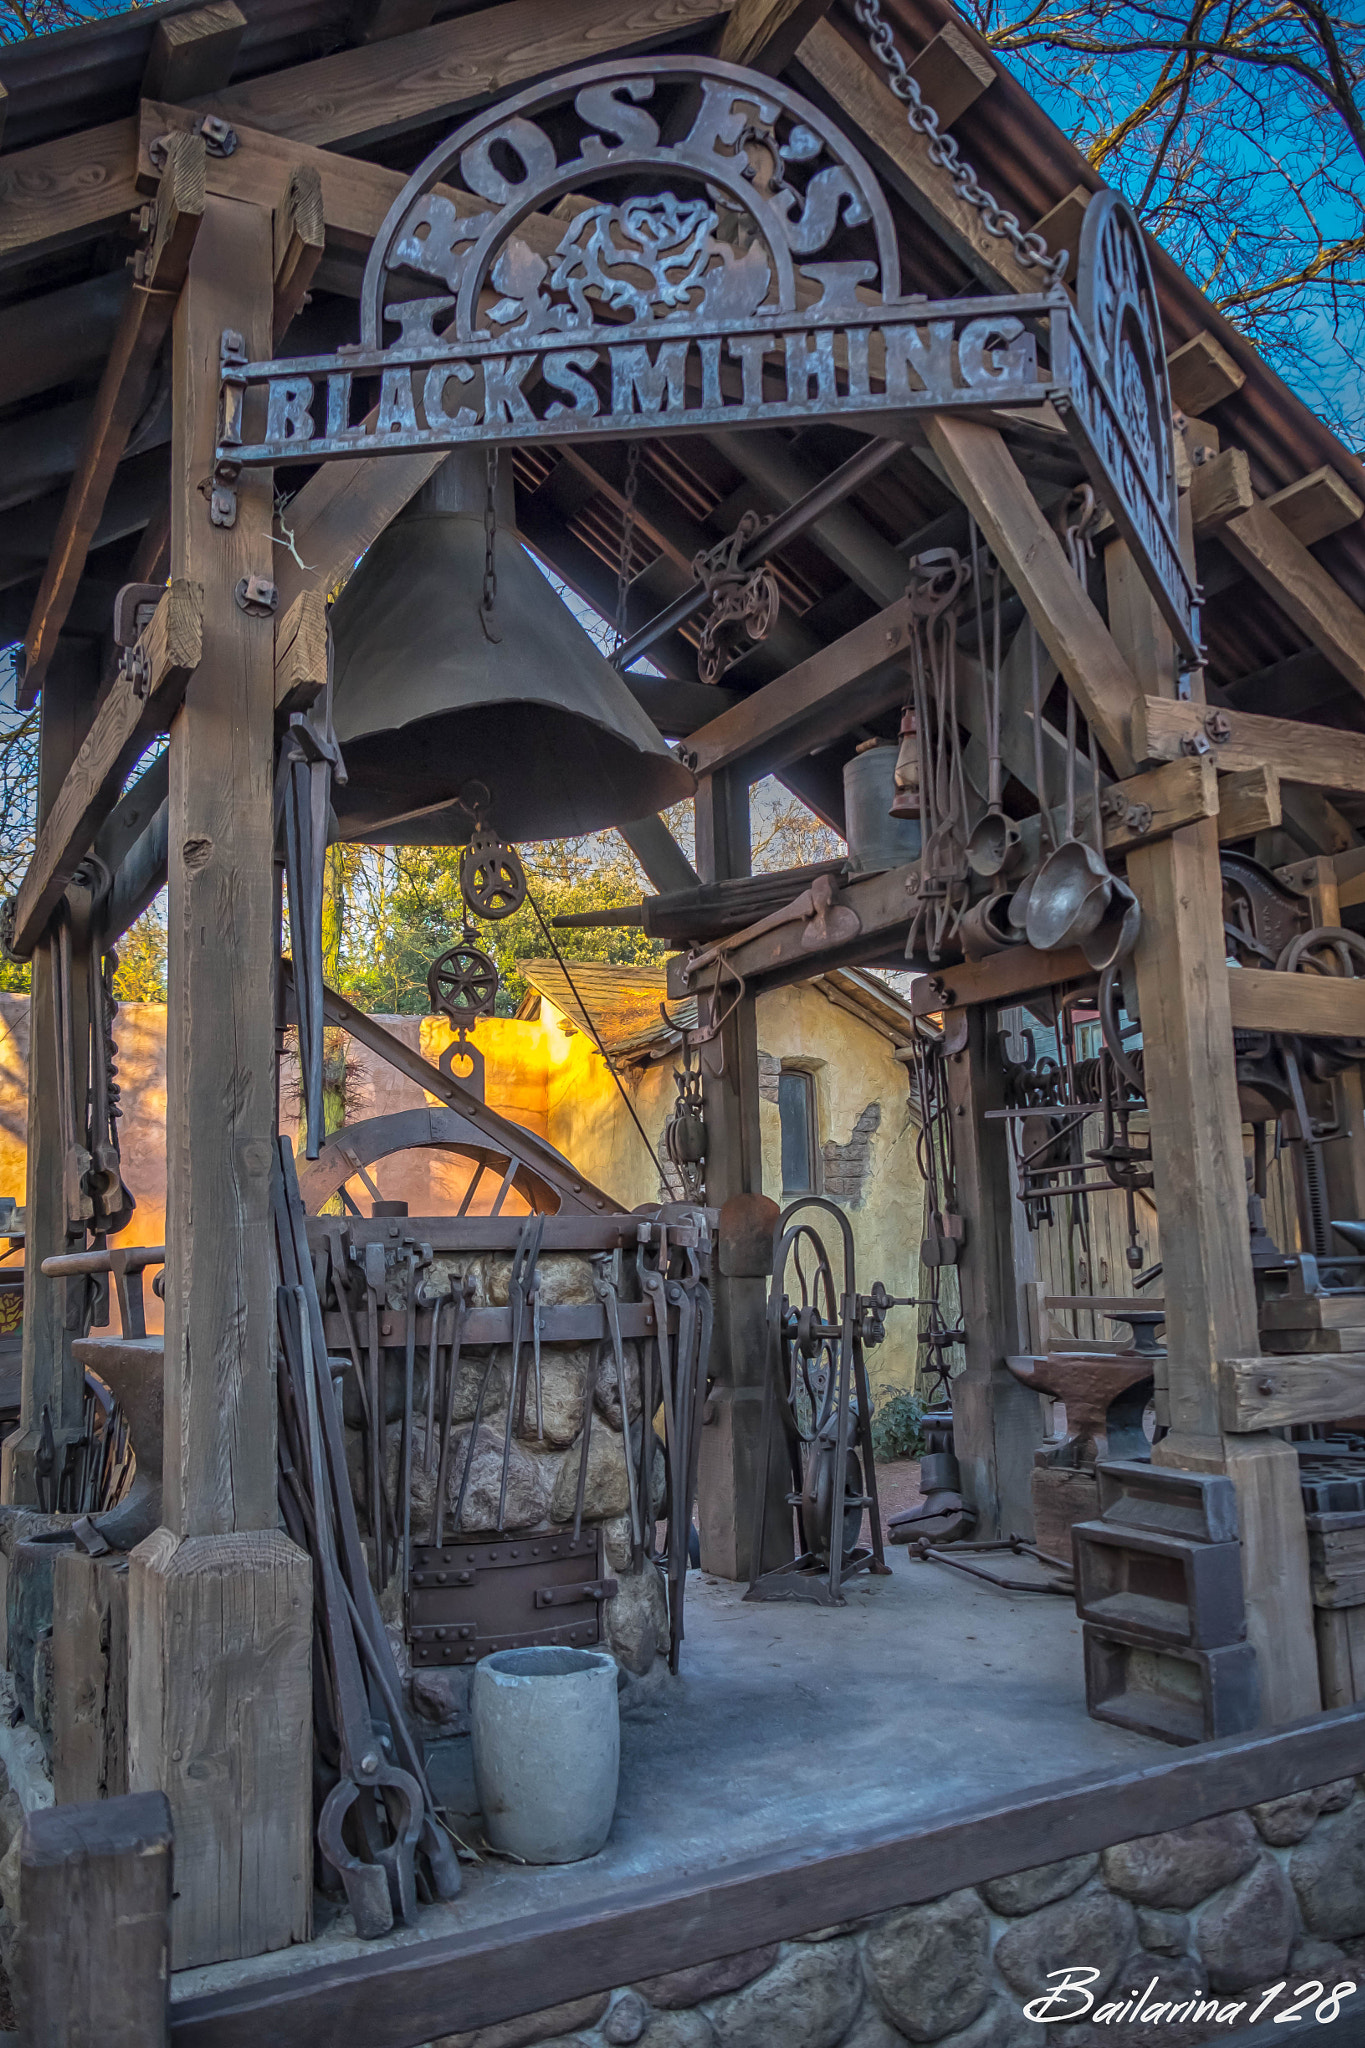 Fujifilm X-T10 + Fujifilm XF 18-135mm F3.5-5.6 R LM OIS WR sample photo. Rose's blacksmithing in frontierland photography